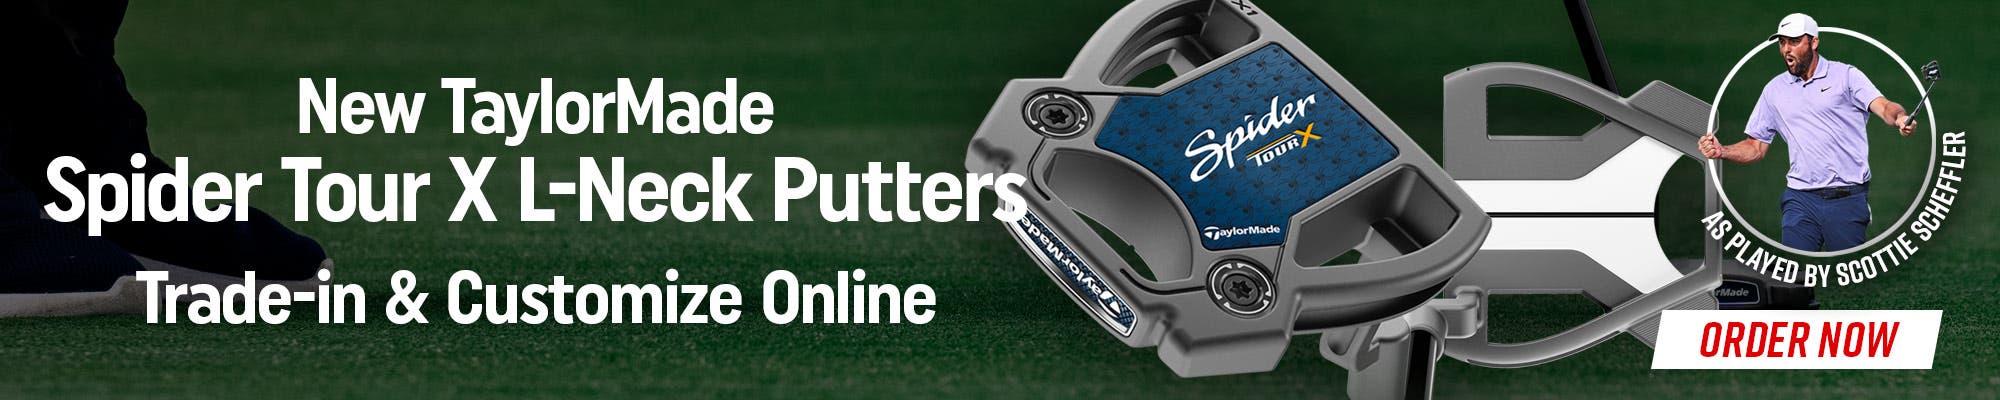 new taylormade spider tour l-neck putters | trade in and customize online | order now